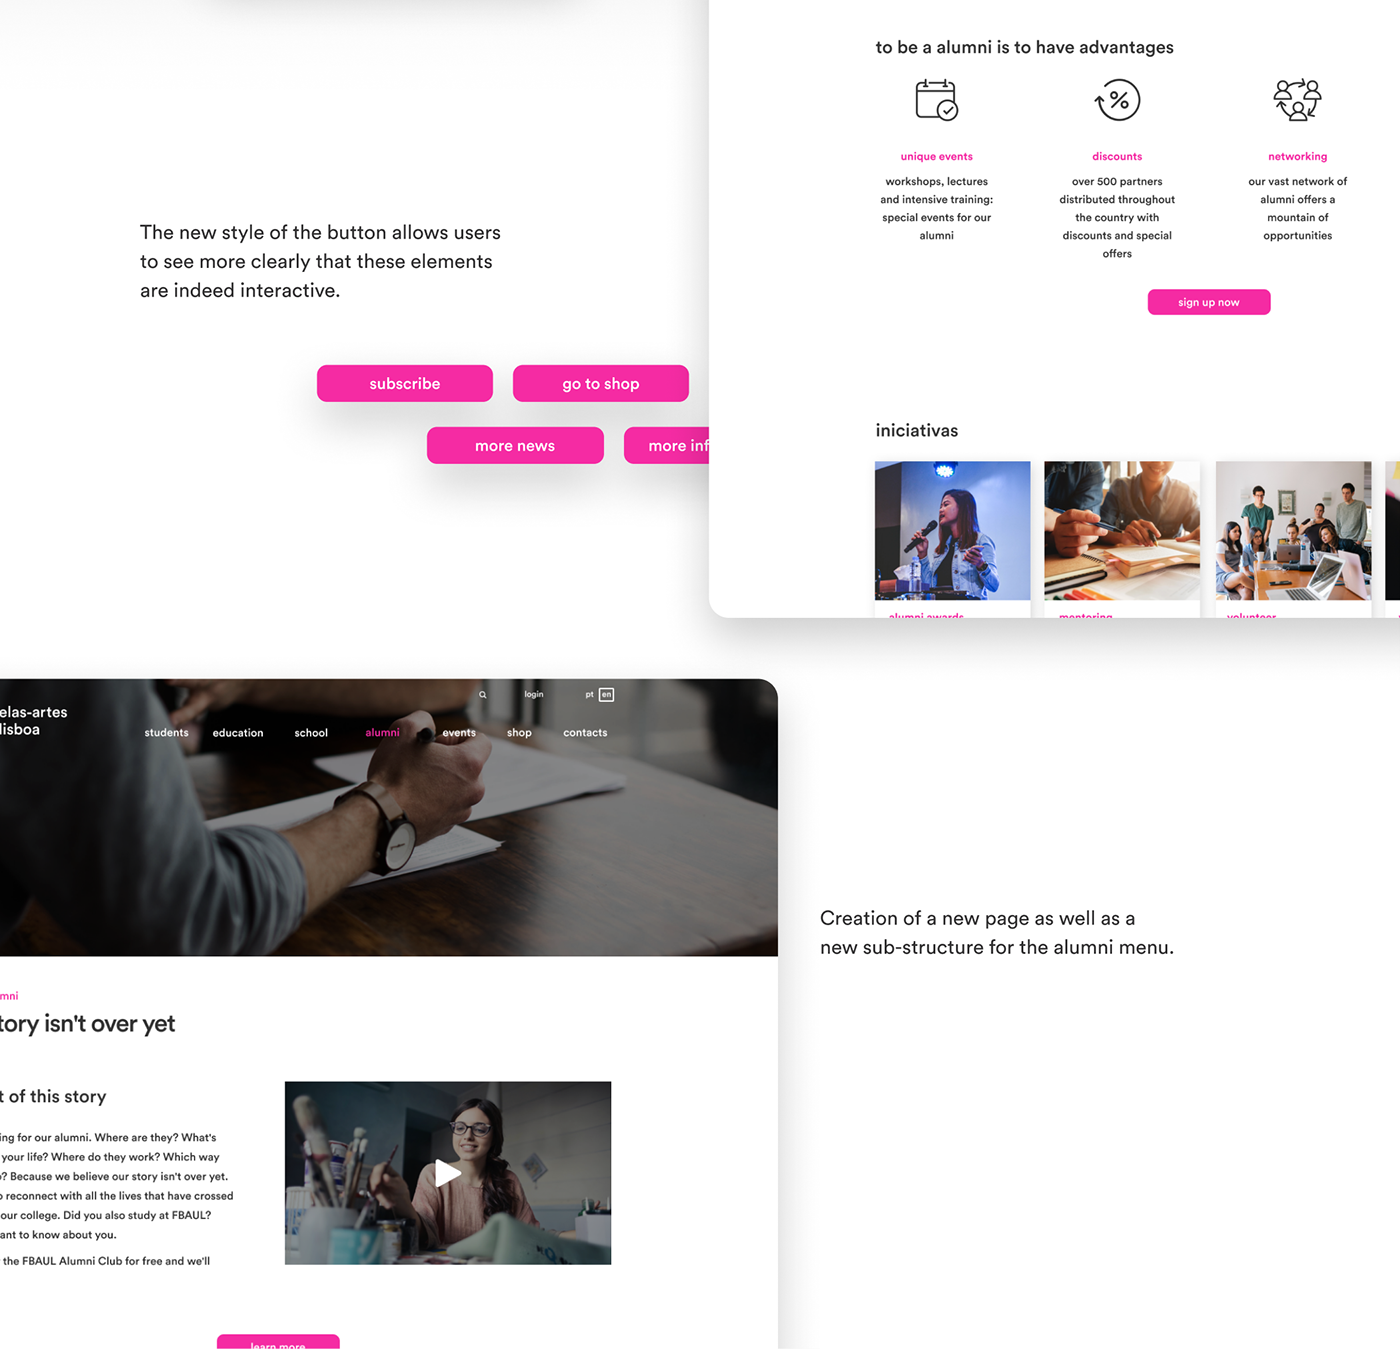 journey map persona prototype redesign Service design site user testing UX Research ux/ui visual design